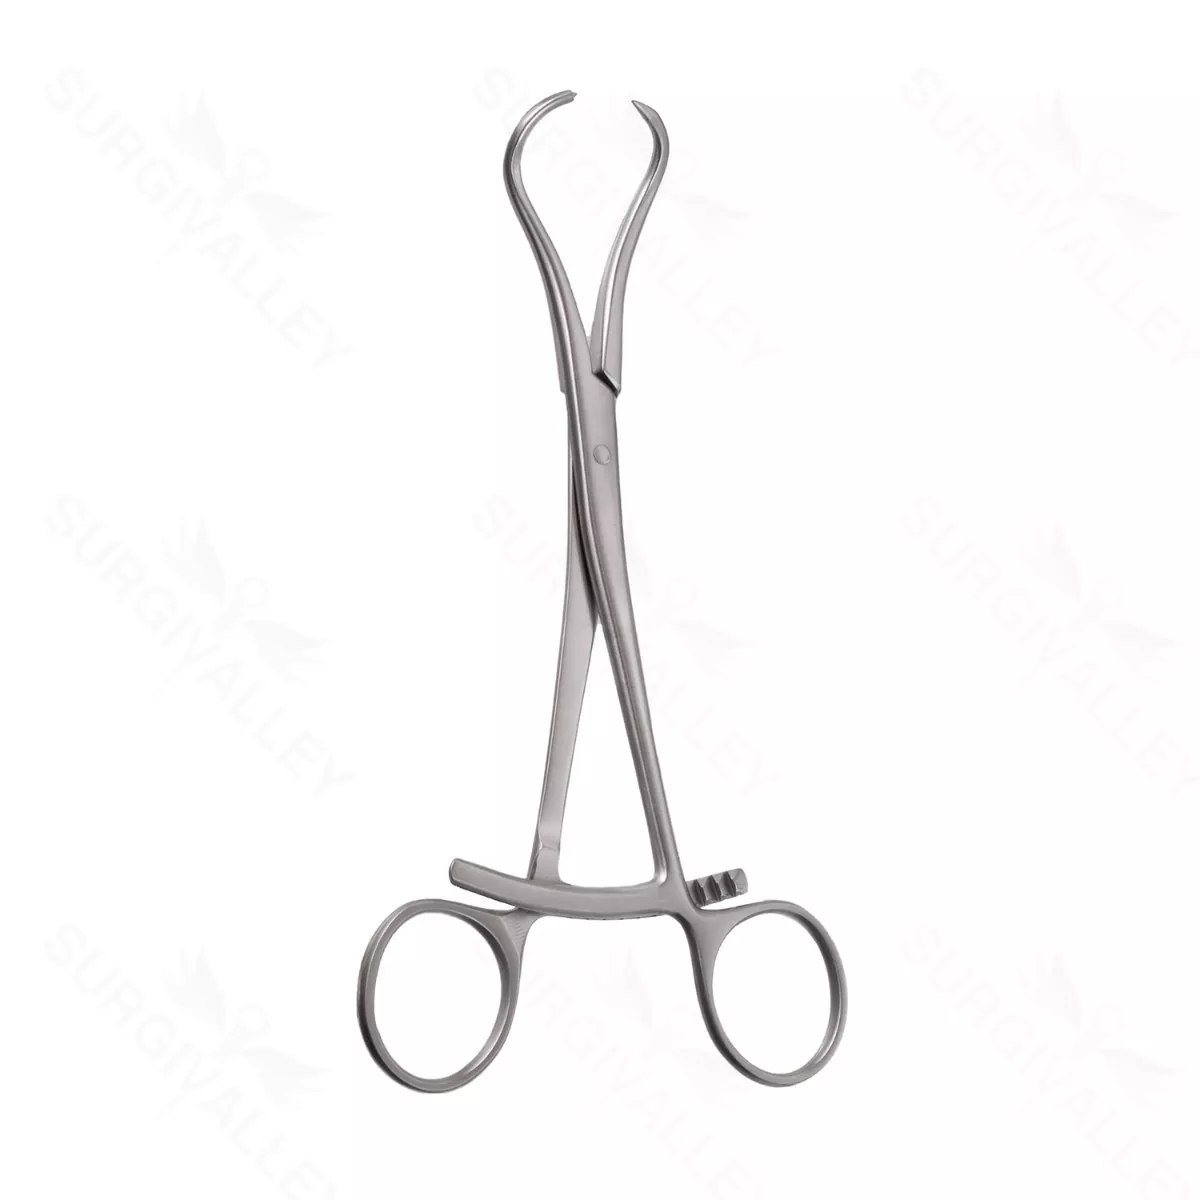 6 3/4″ Bone Reduction Forceps Curved